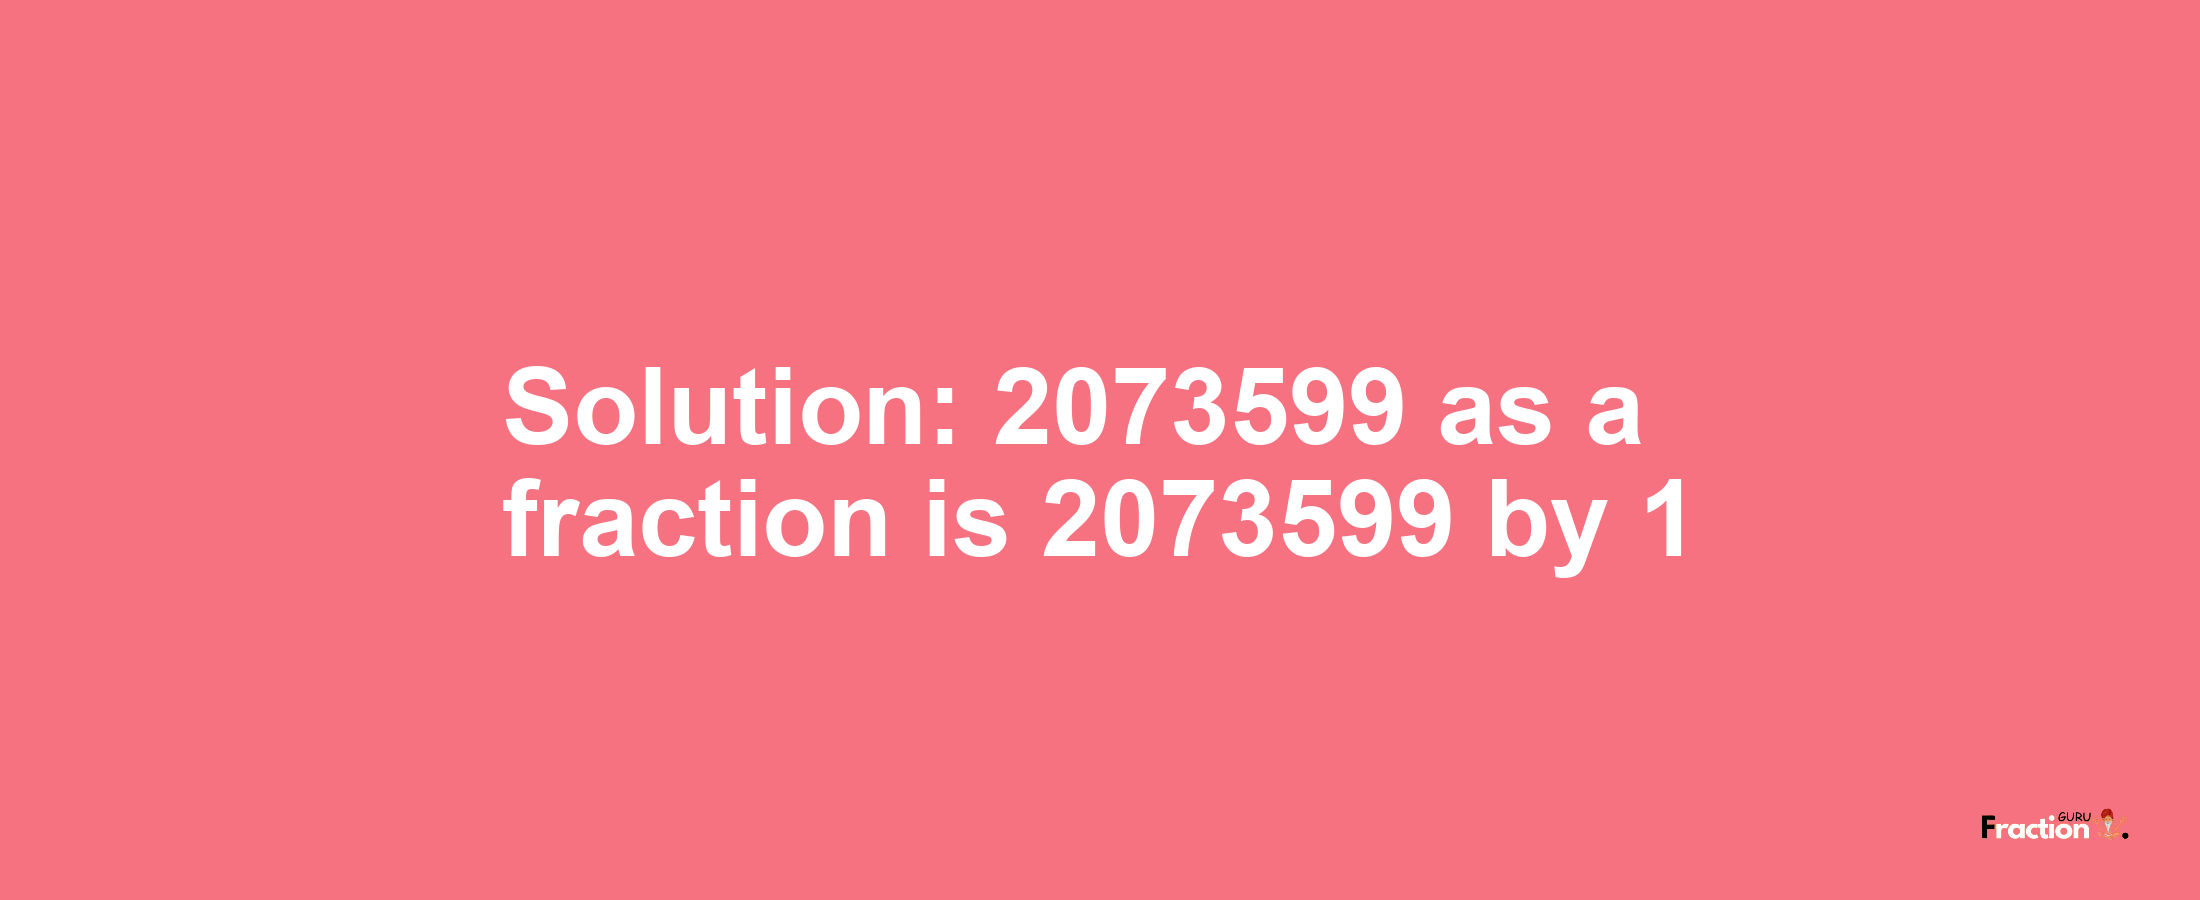 Solution:2073599 as a fraction is 2073599/1